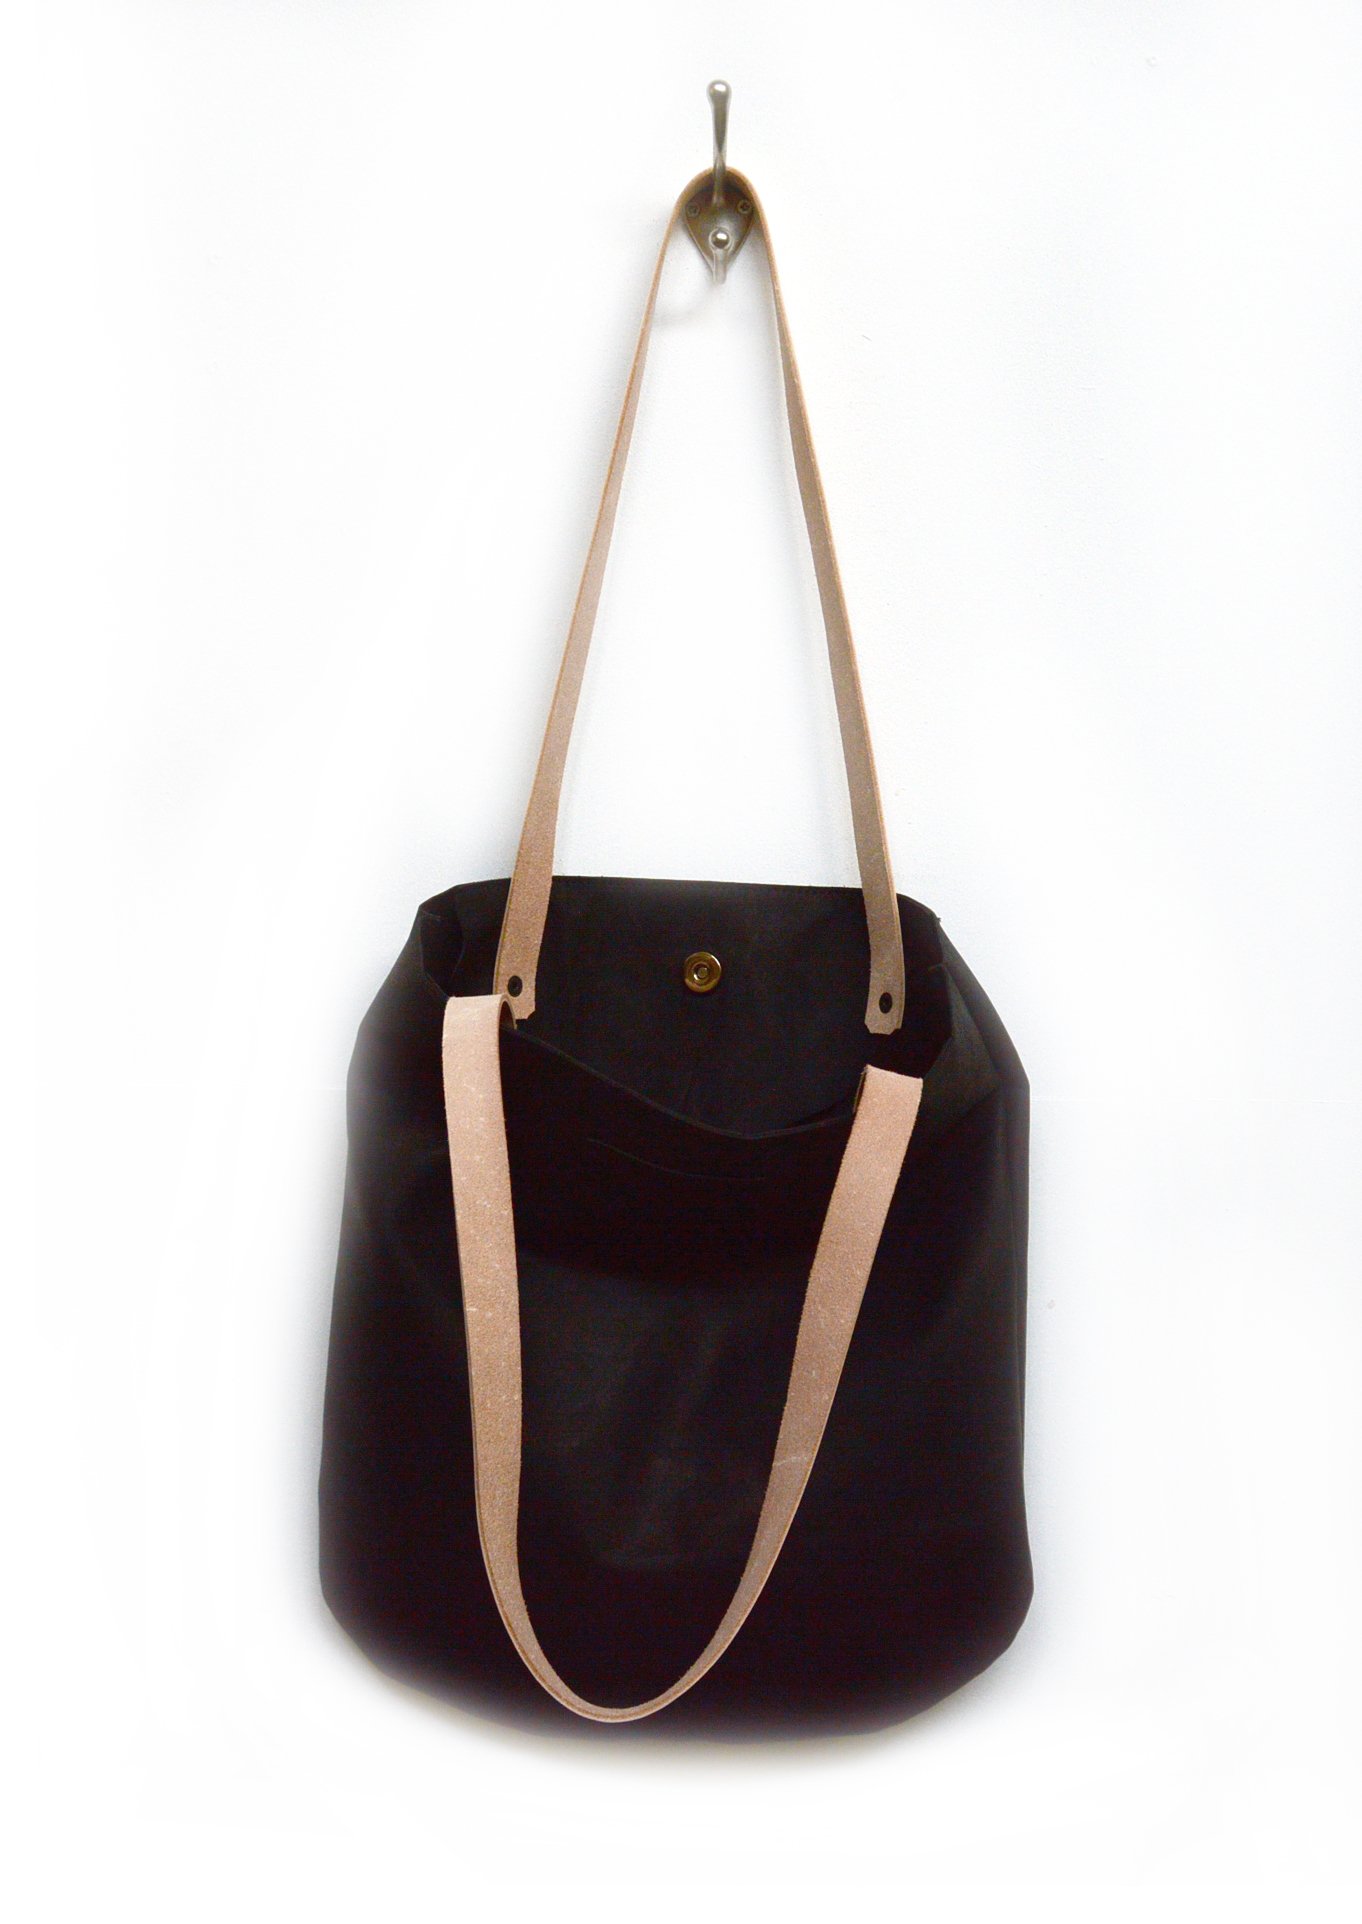 Elegant, Curved Black Leather Tote Bag | LABOUR OF ART - Leather Goods